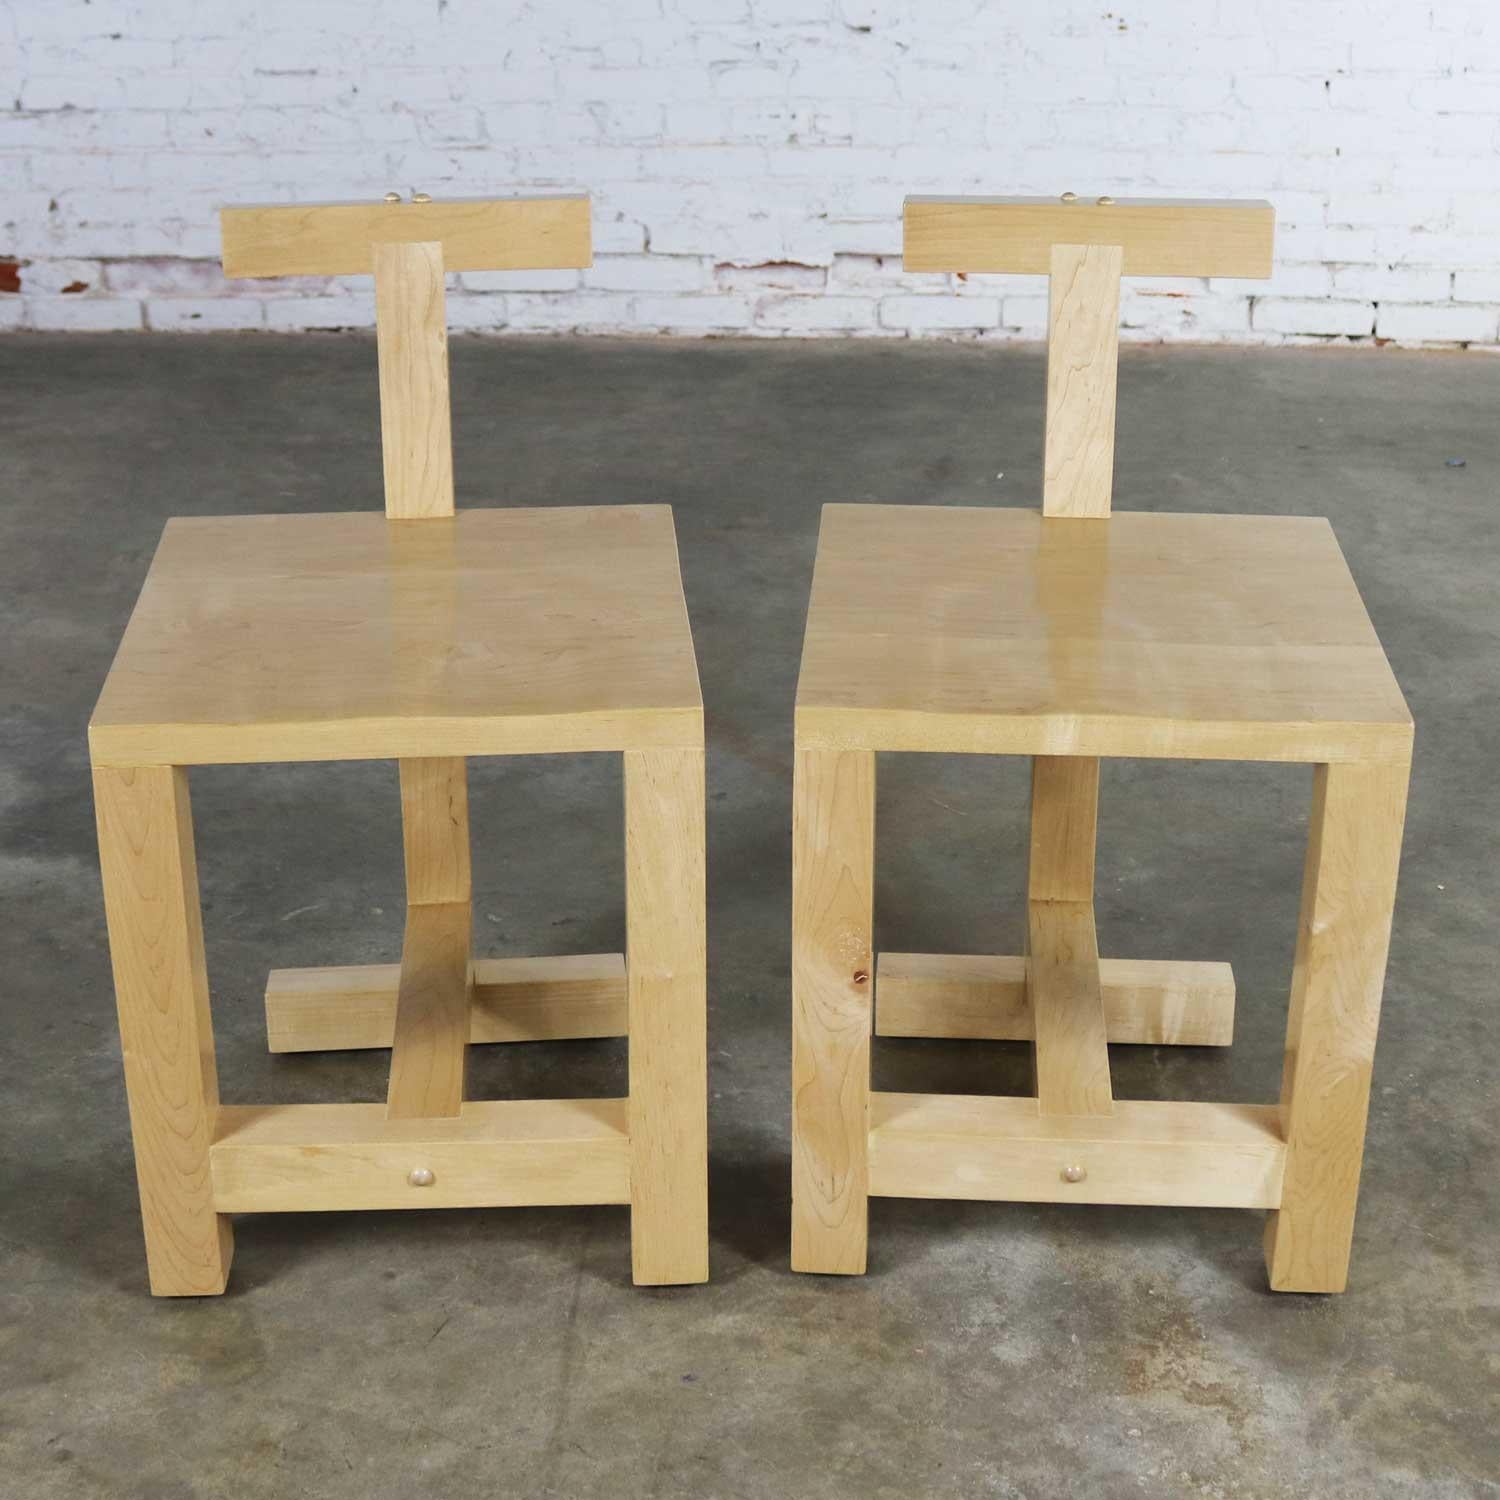 Post-Modern Pair of Postmodern Handcrafted Maple Chairs Signed Brice B. Durbin 1996